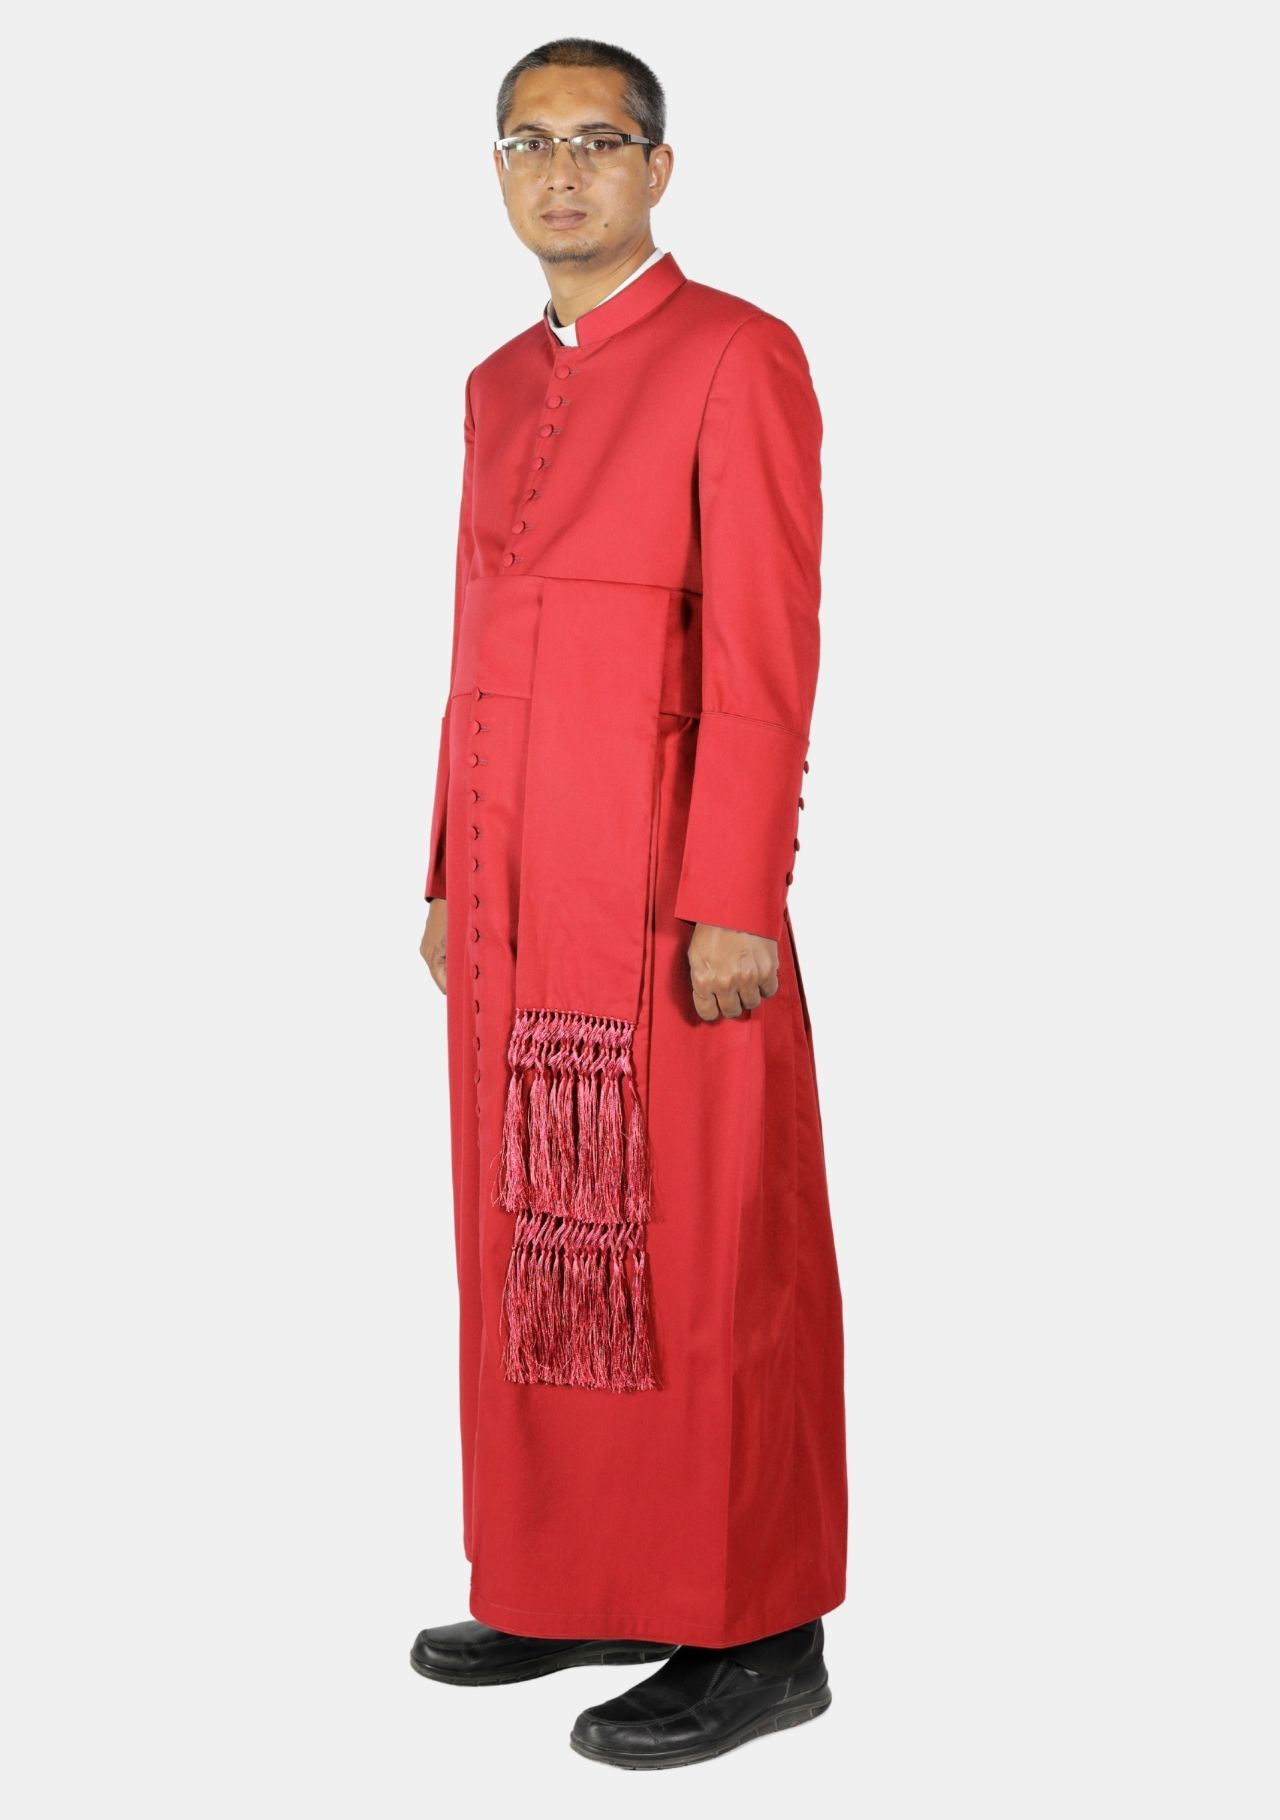 The  Symbolism of  Clergy Dresses A Time Honoured Tradition